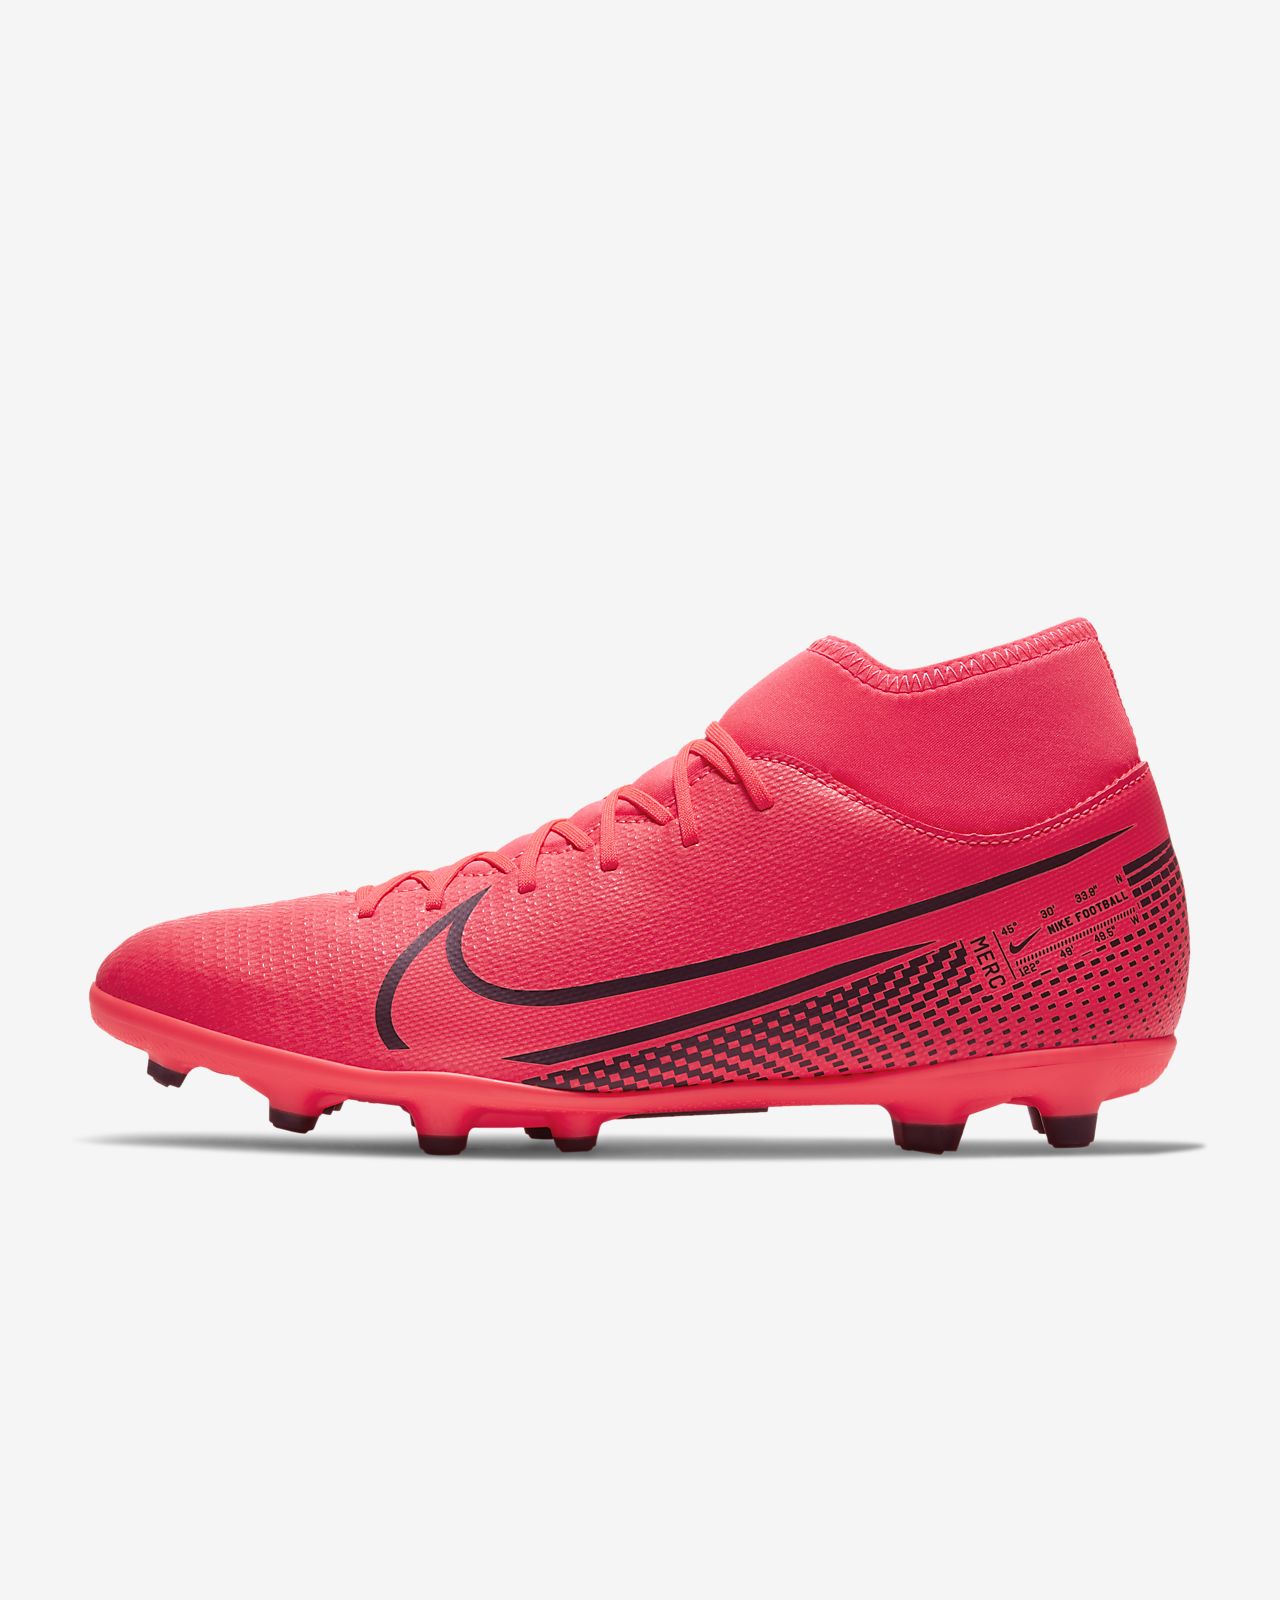 SCARPE CALCETTO NIKE SUPERFLY 7 CLUB MDS IC.